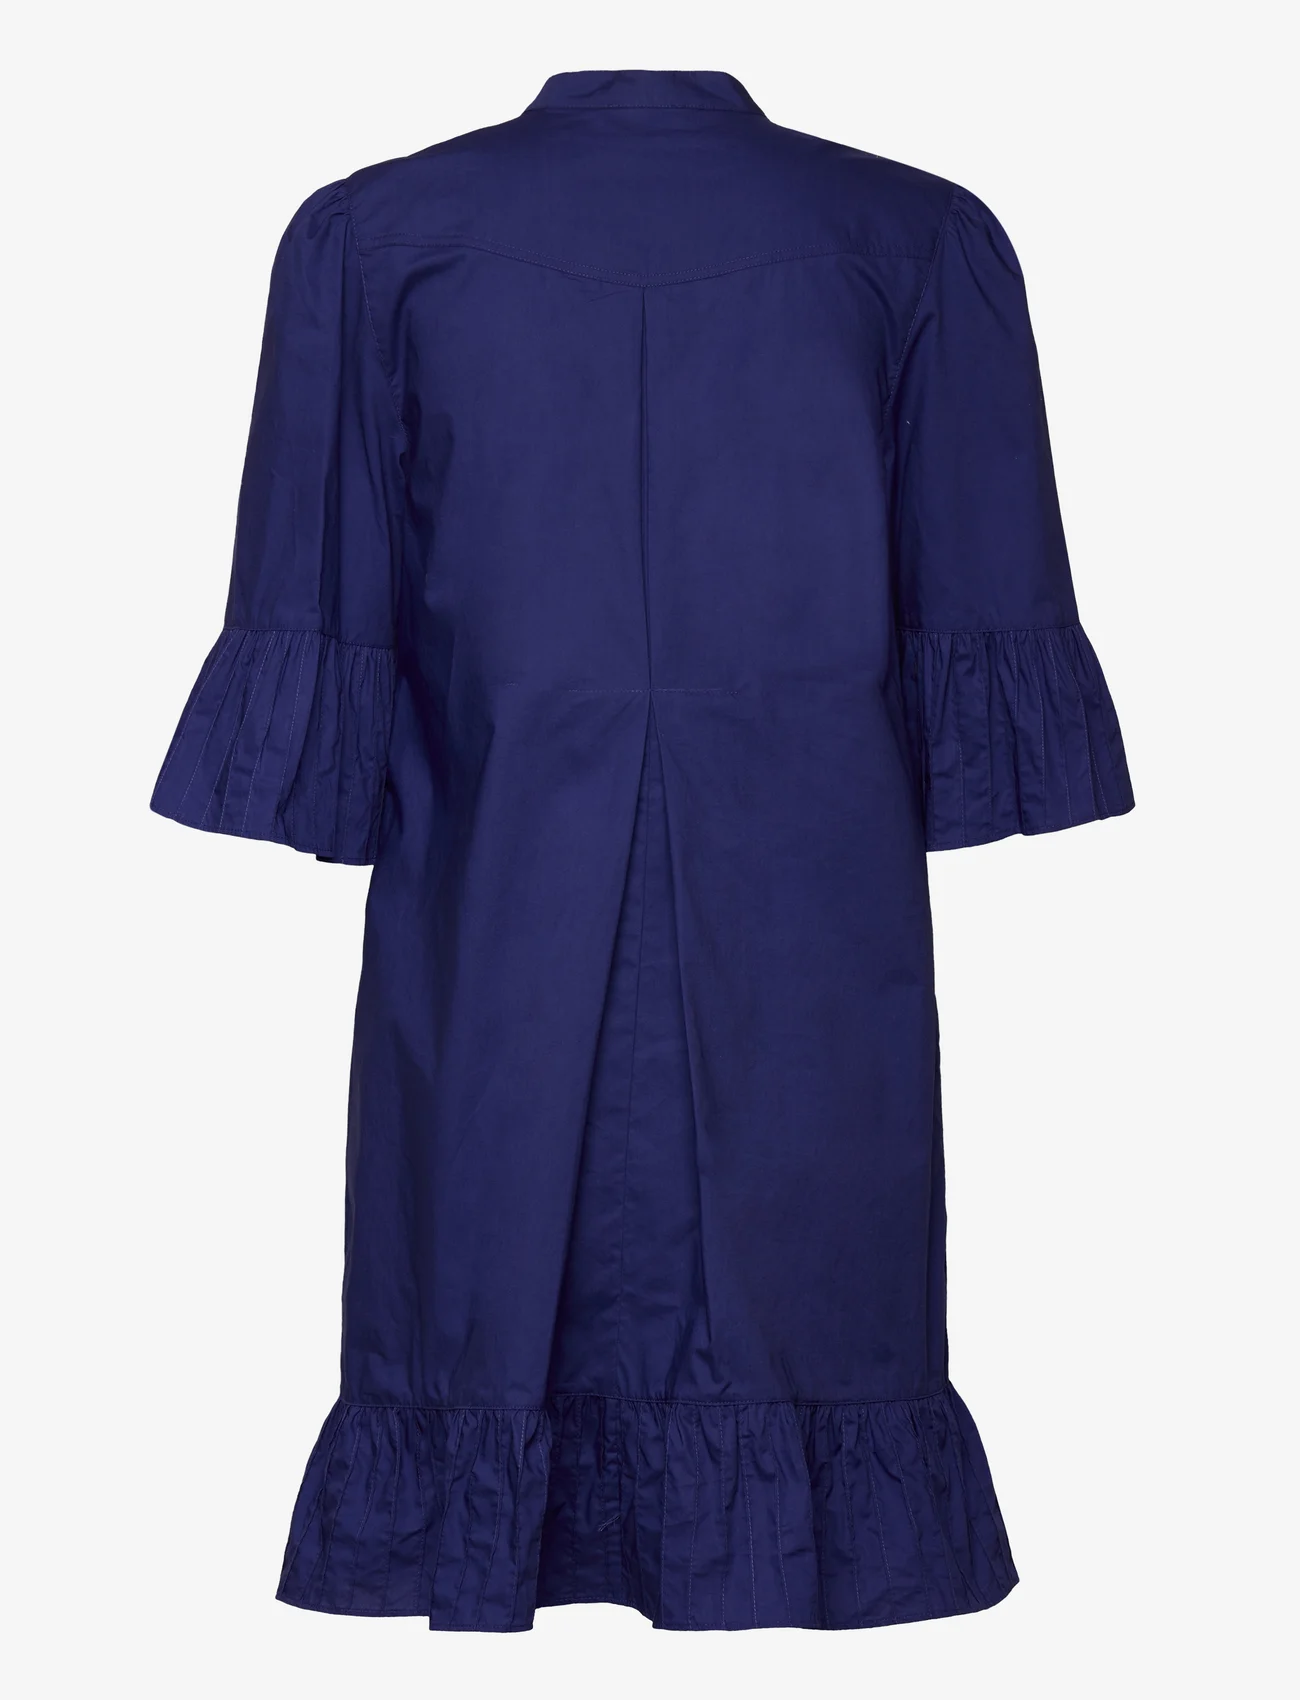 See by Chloé - Dress - shirt dresses - abyss water - 1